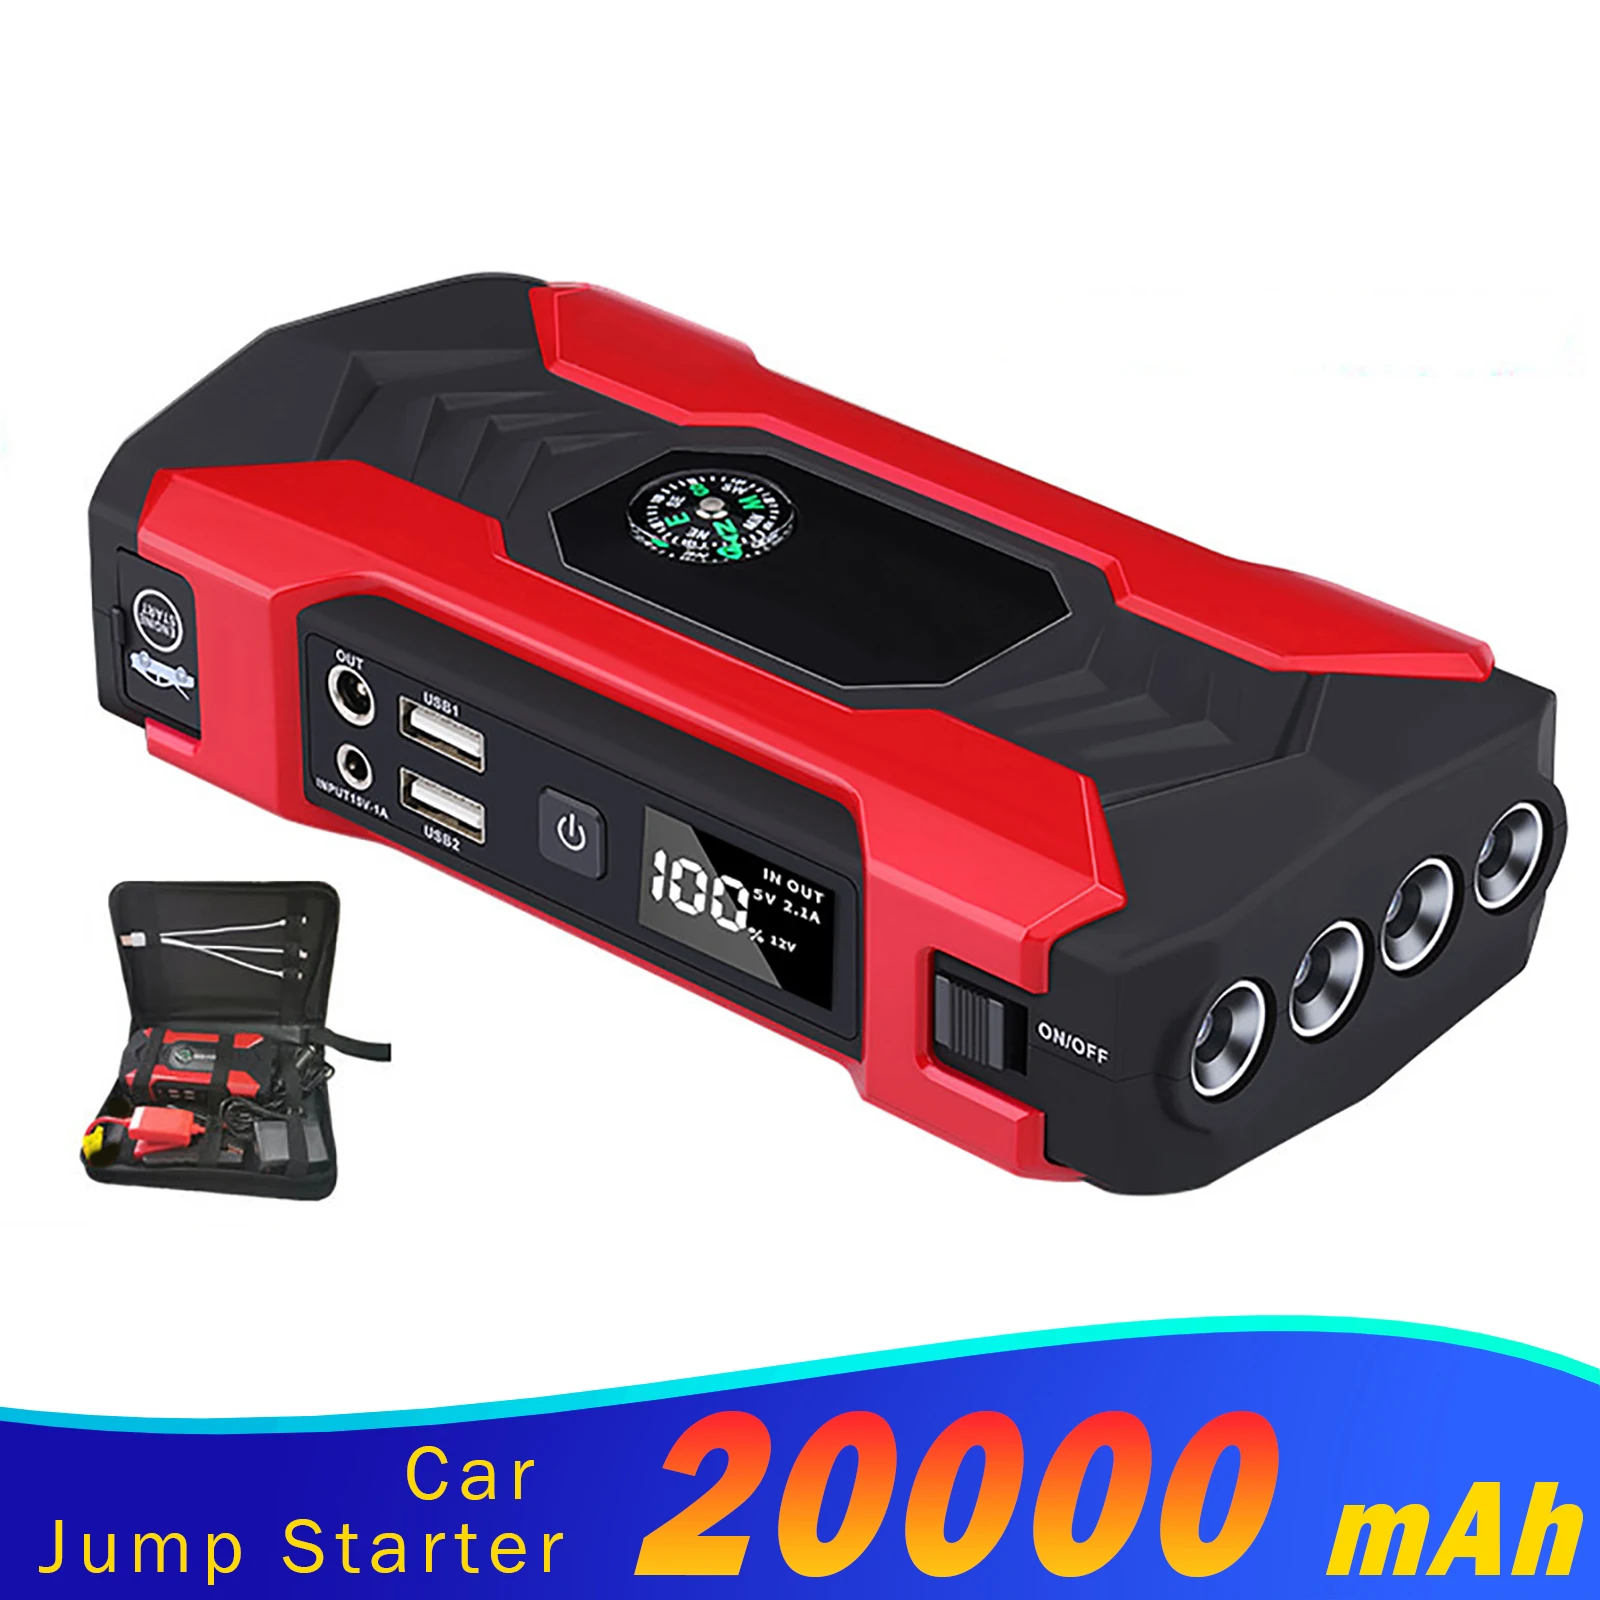 

Power Bank 22000mAh 400A Jump Starter Portable Charger Car Booster 12V Auto Starting Device Emergency Car Battery Starter